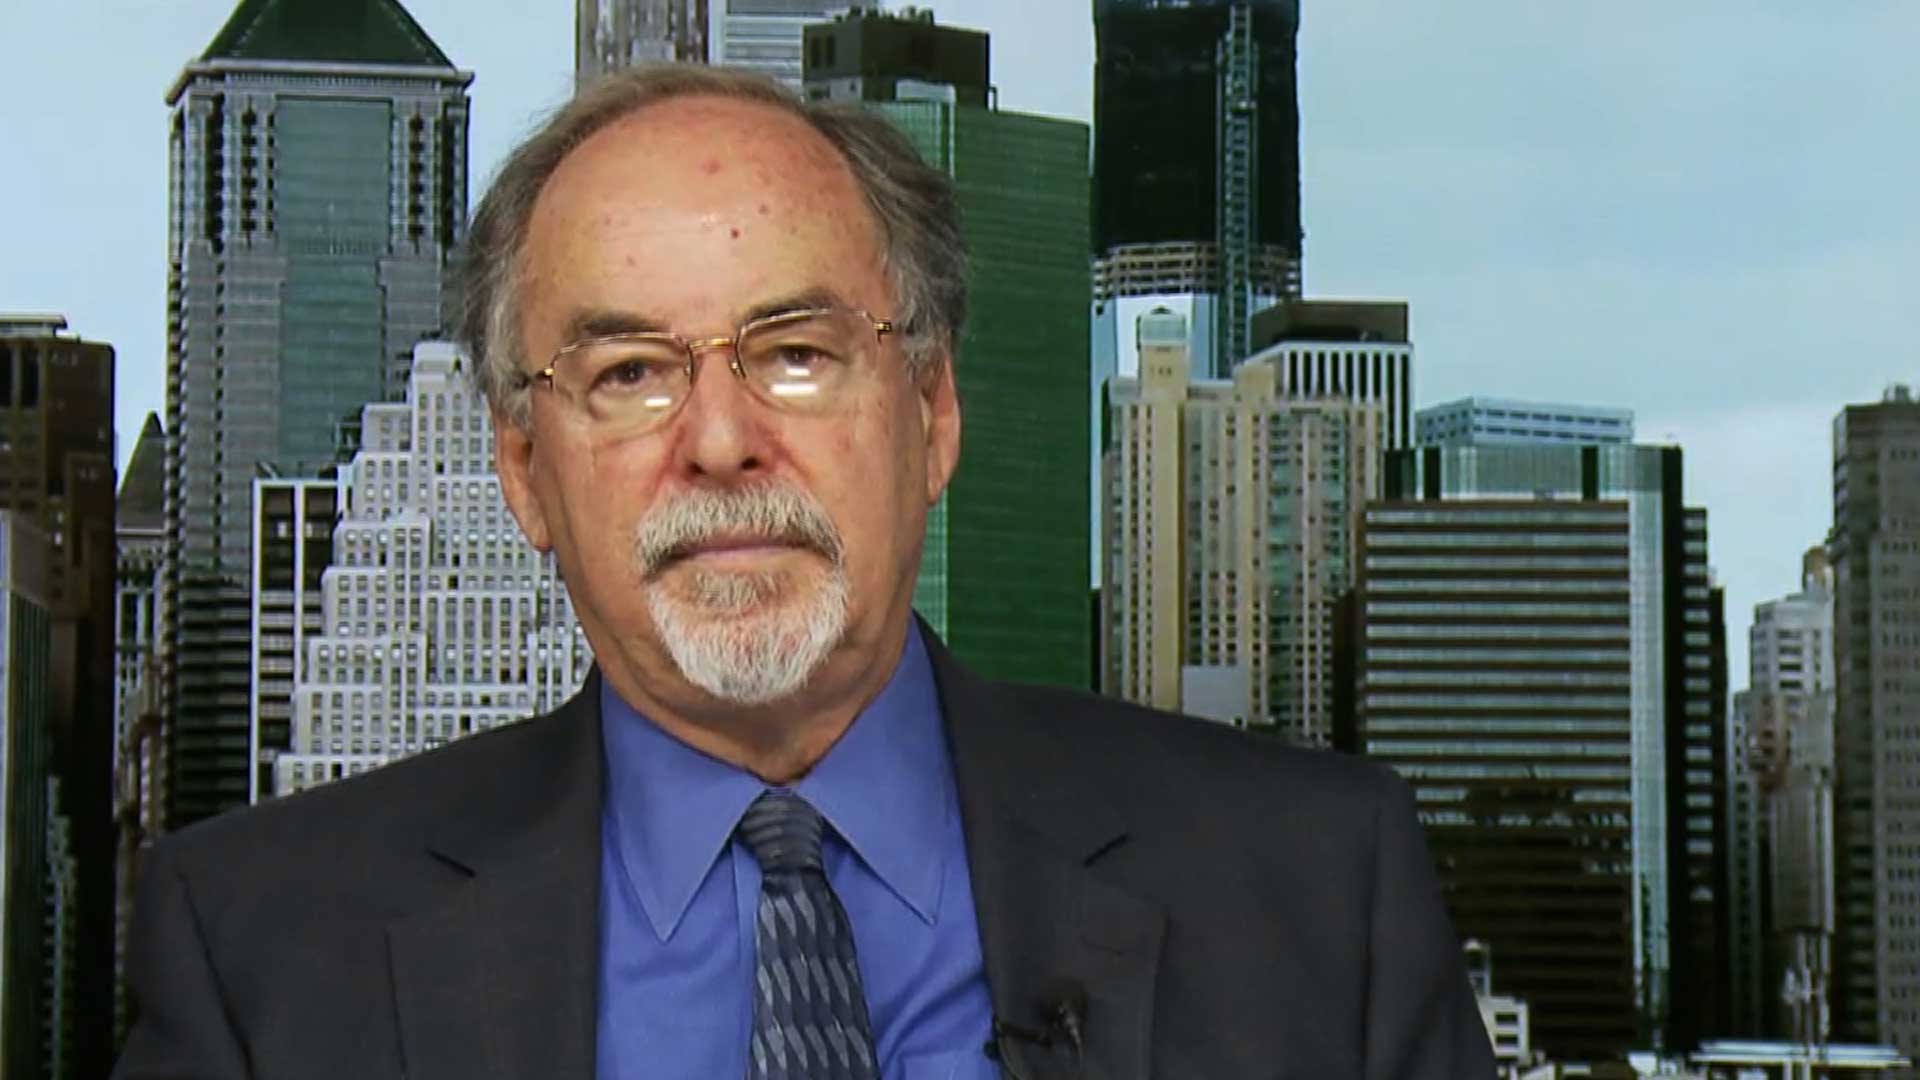 Image: David Horowitz: We are marching to a one party state… one person’s dissent is another person’s hate speech (VIDEO)